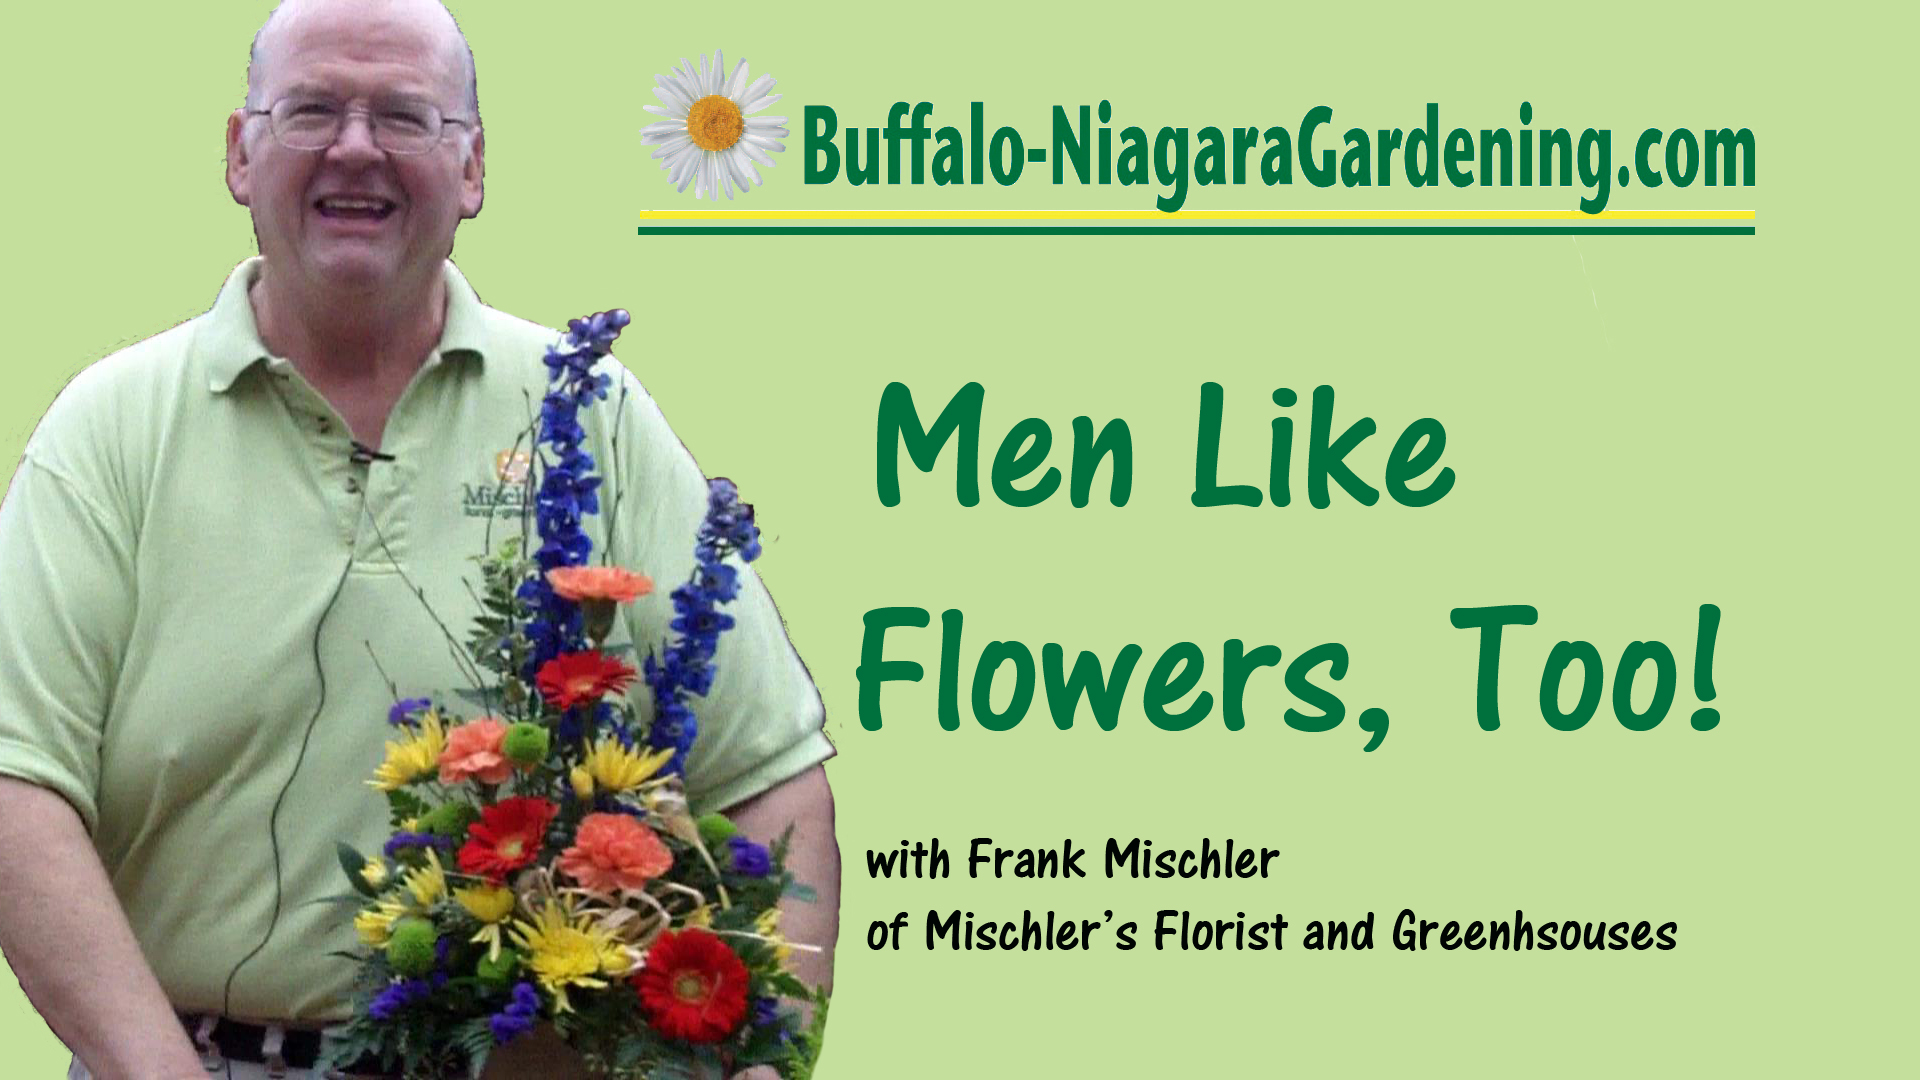 Title for video "Men Like Flowers, Too!"